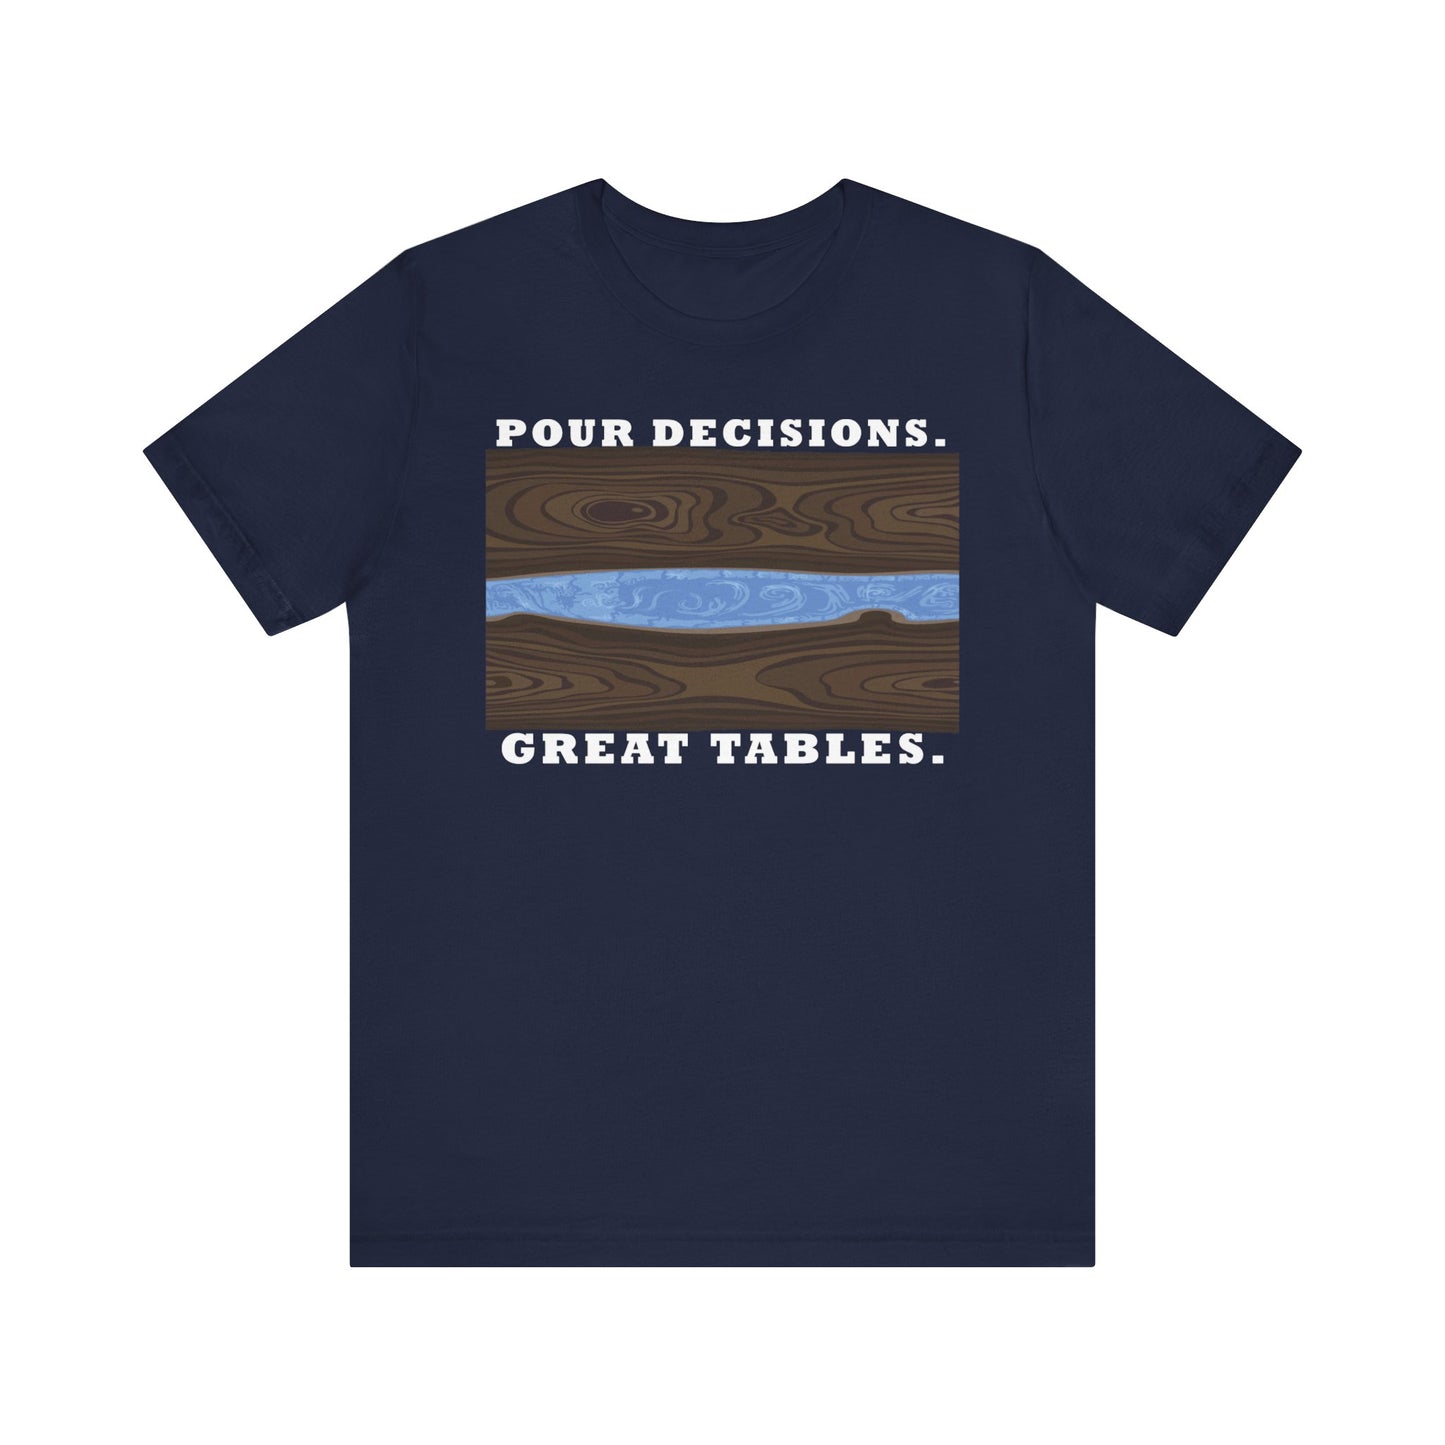 Pour Decisions. Great Tables. Unisex Jersey Short Sleeve Tee